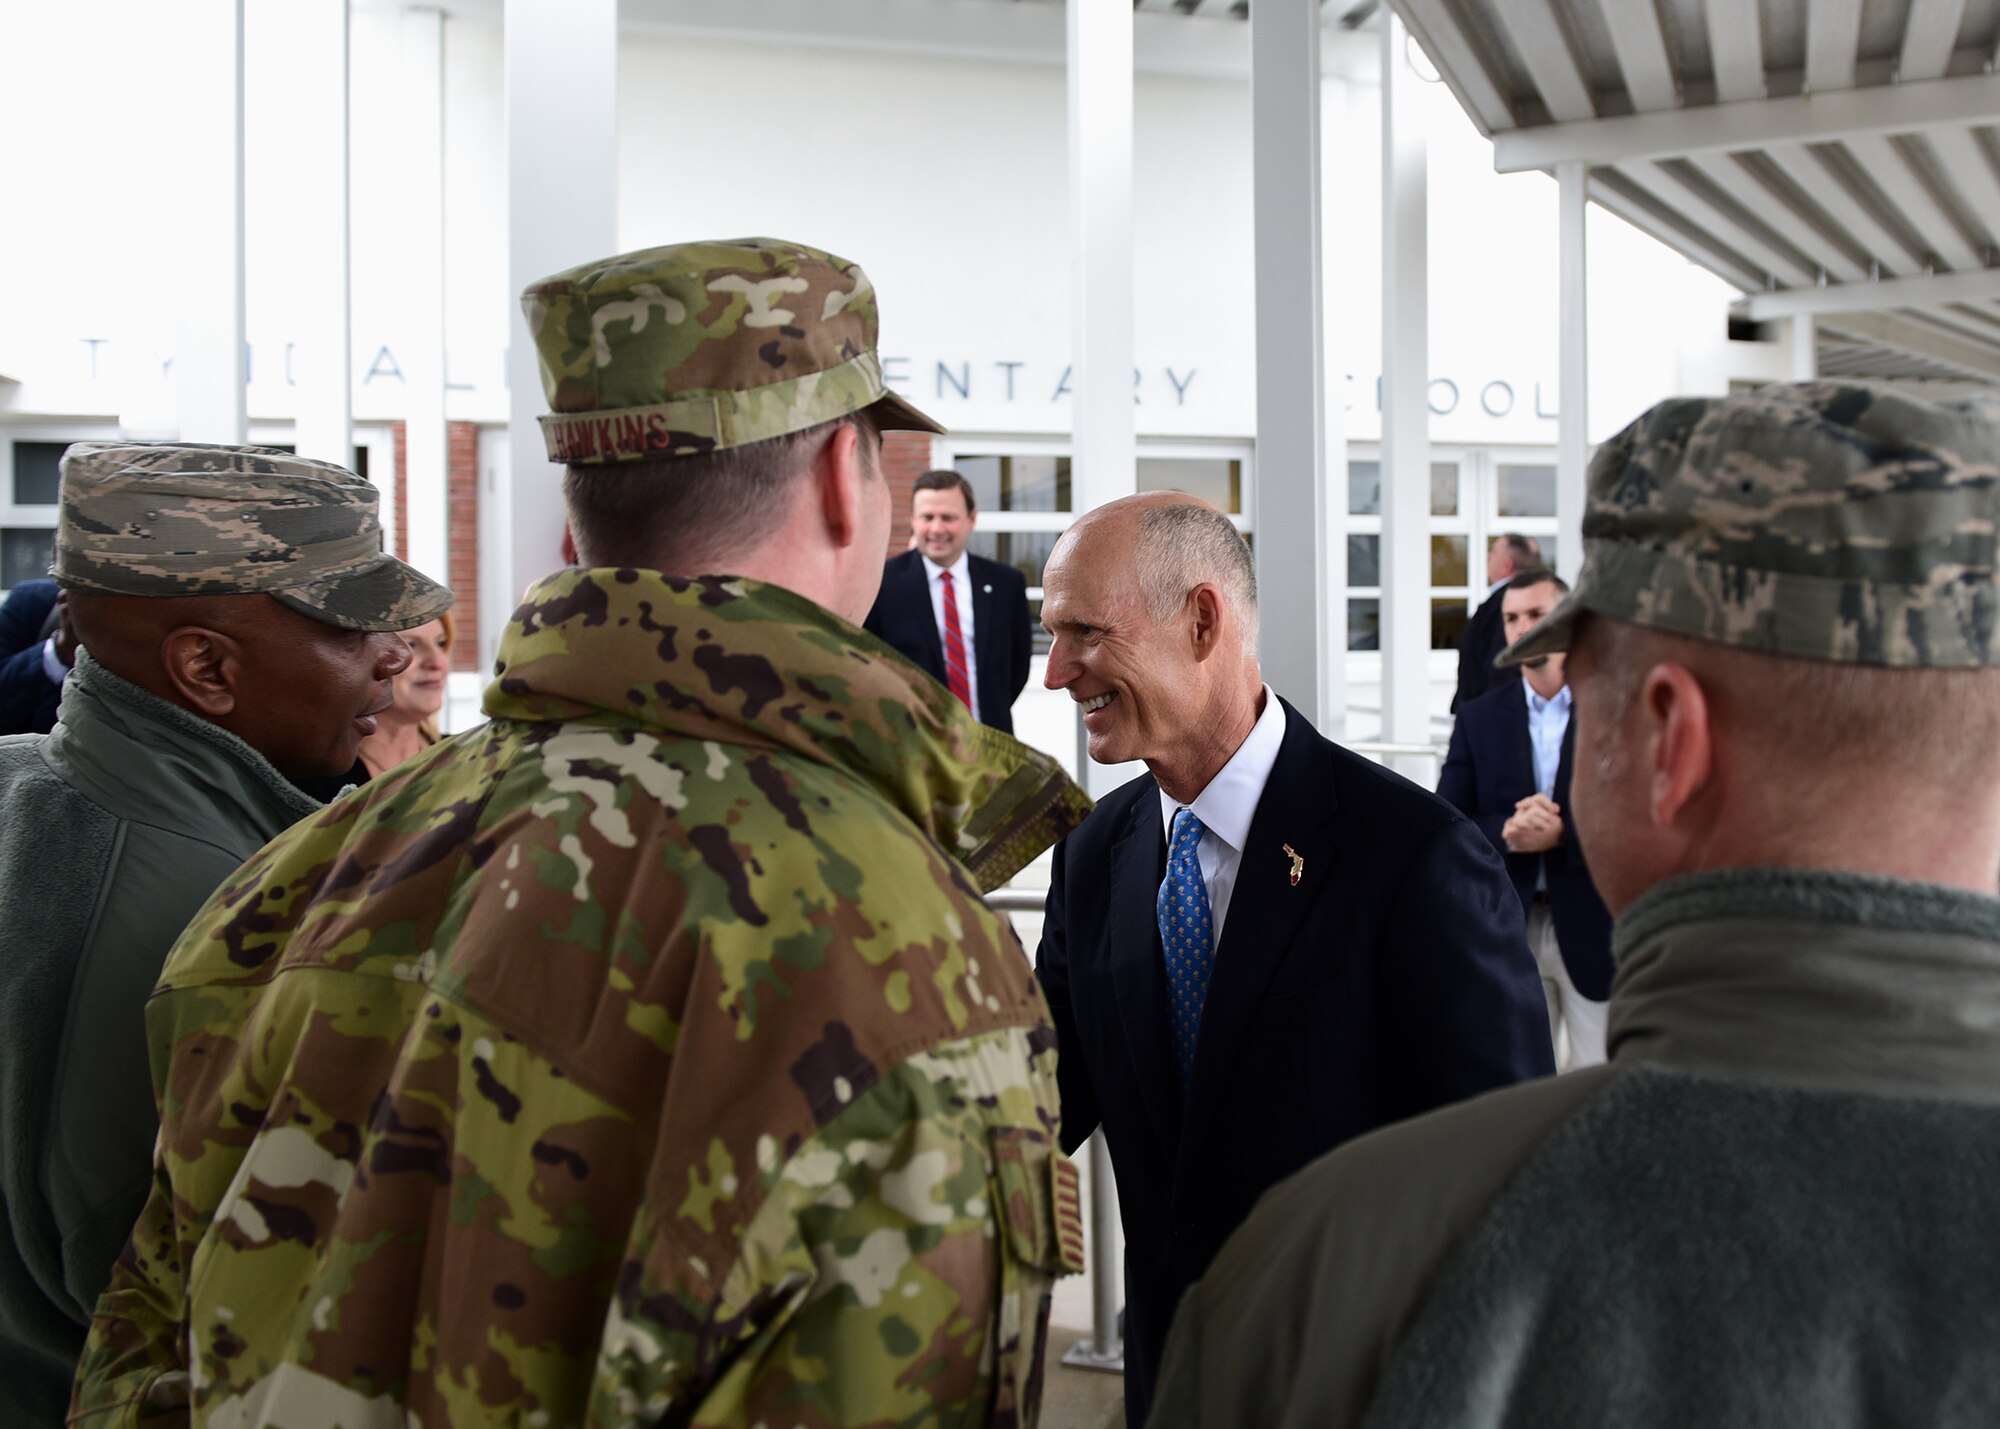 Gov. Rick Scott, current governor of Florida, greets 325th Fighter Wing leadership during a visit to the re-opening of Tyndall Elementary School near Tyndall Air Force Base, Fla., Dec. 10, 2018. Scott visited the area numerous times in the wake of Hurricane Michael. (U.S. Air Force photo by Senior Airman Isaiah J. Soliz